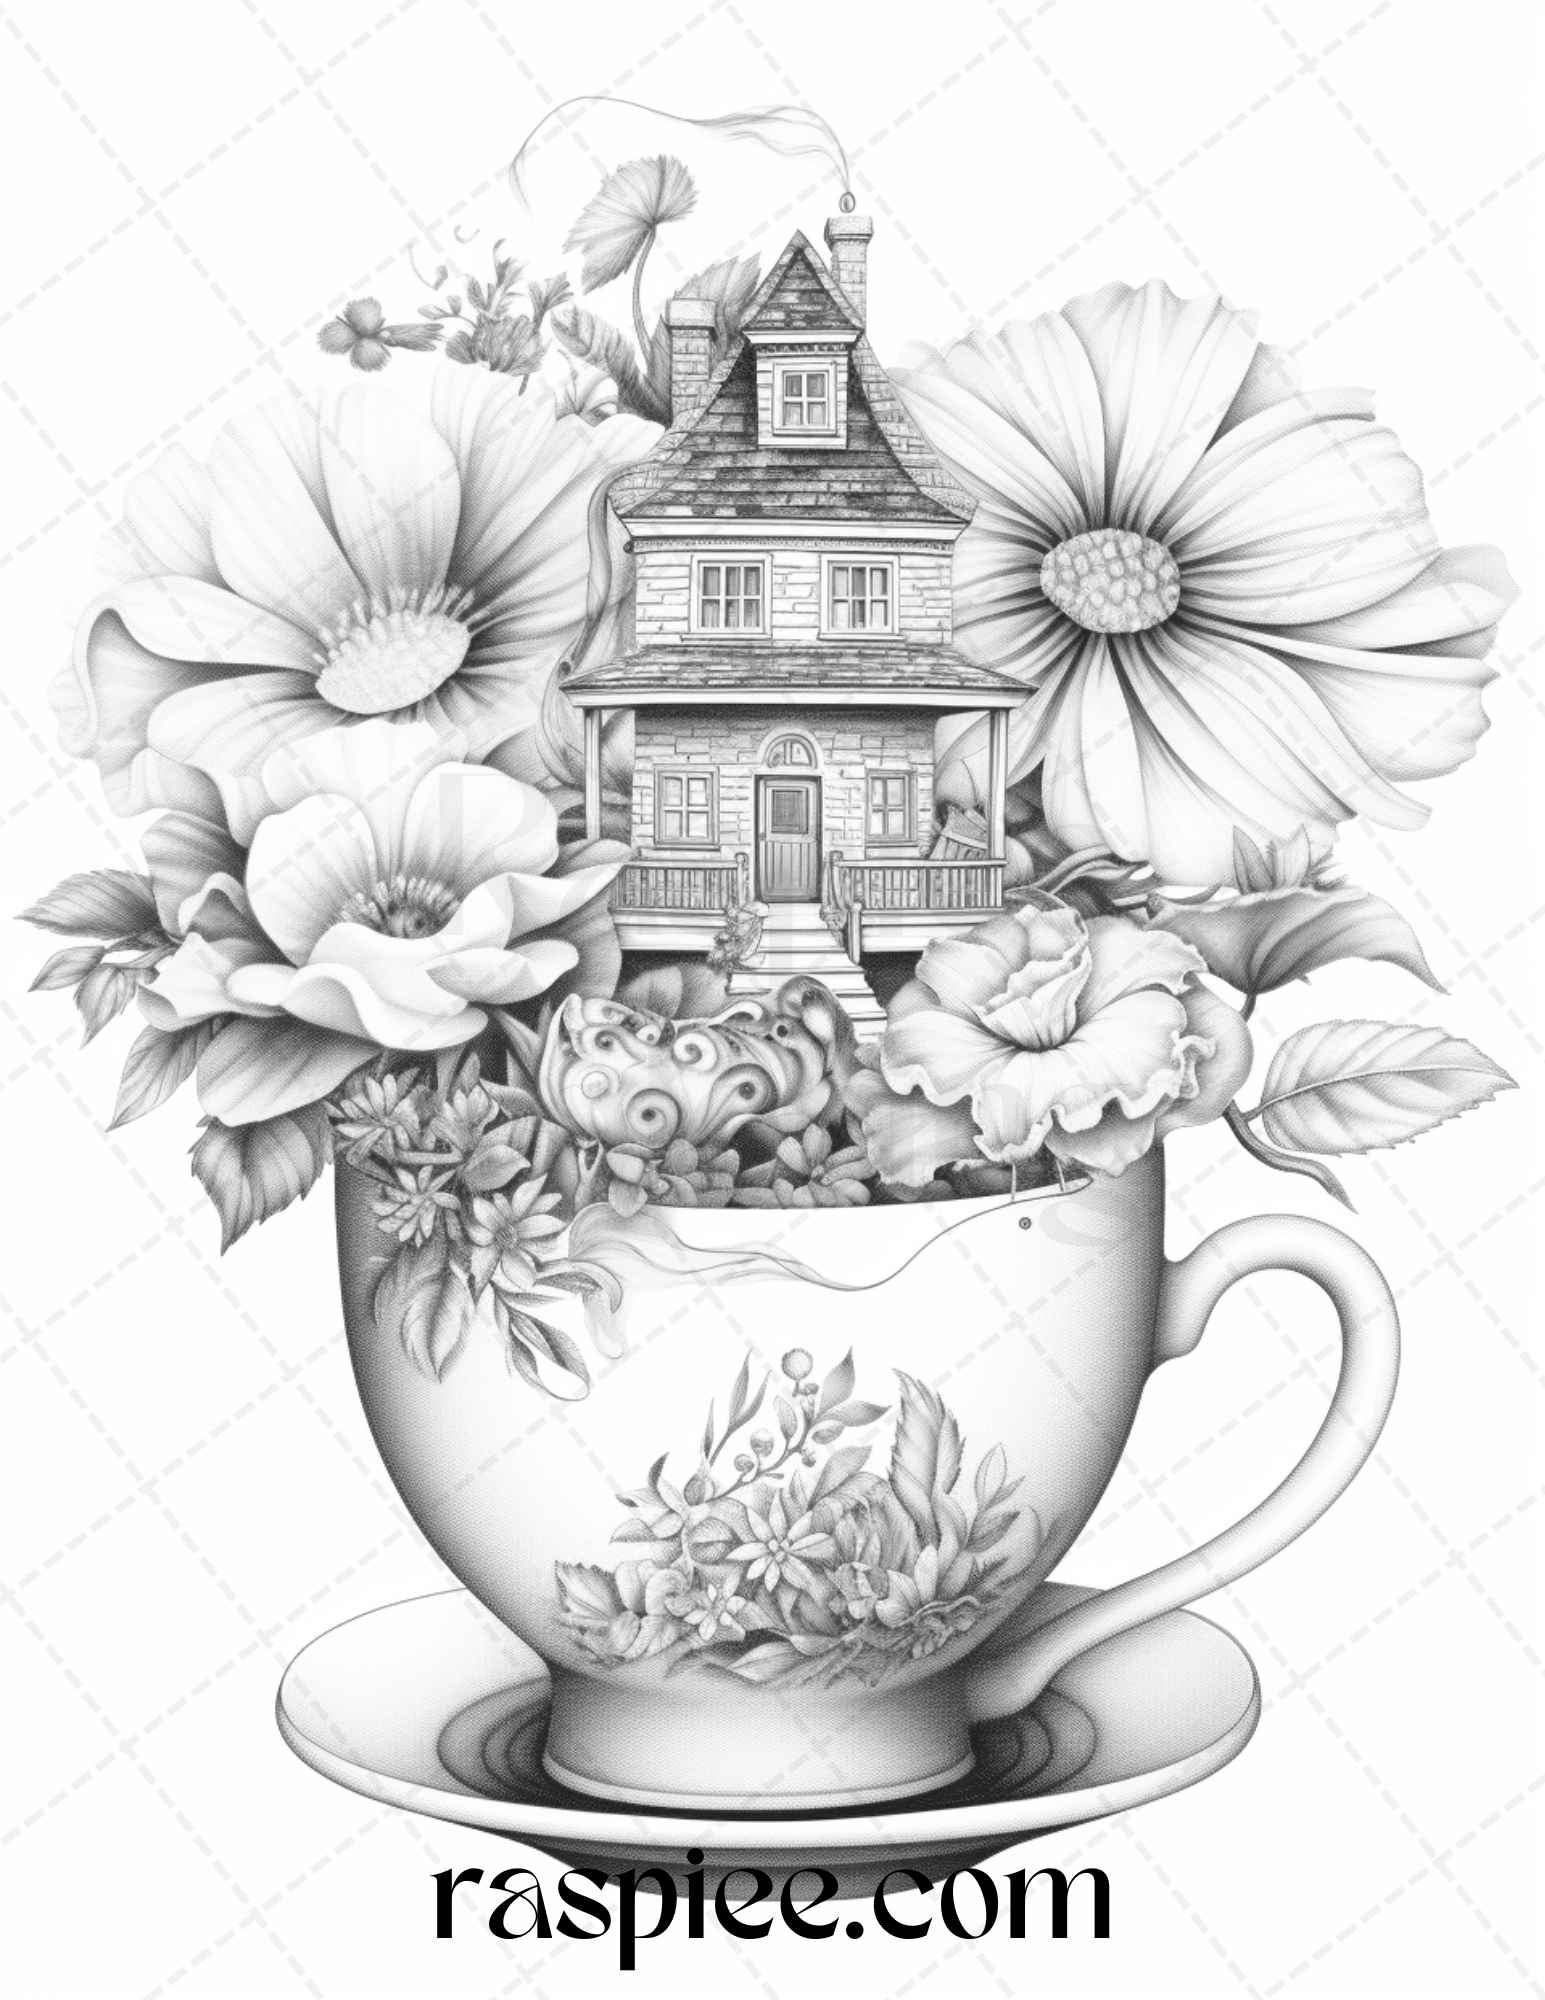 Flower Teacup Fairy Houses Coloring Pages, Printable Grayscale Coloring Pages for Adults, Floral Fantasy Coloring Sheets, Coloring Pages for Grown-ups, Adult Coloring Book Activity, Relaxing Nature-Inspired Coloring